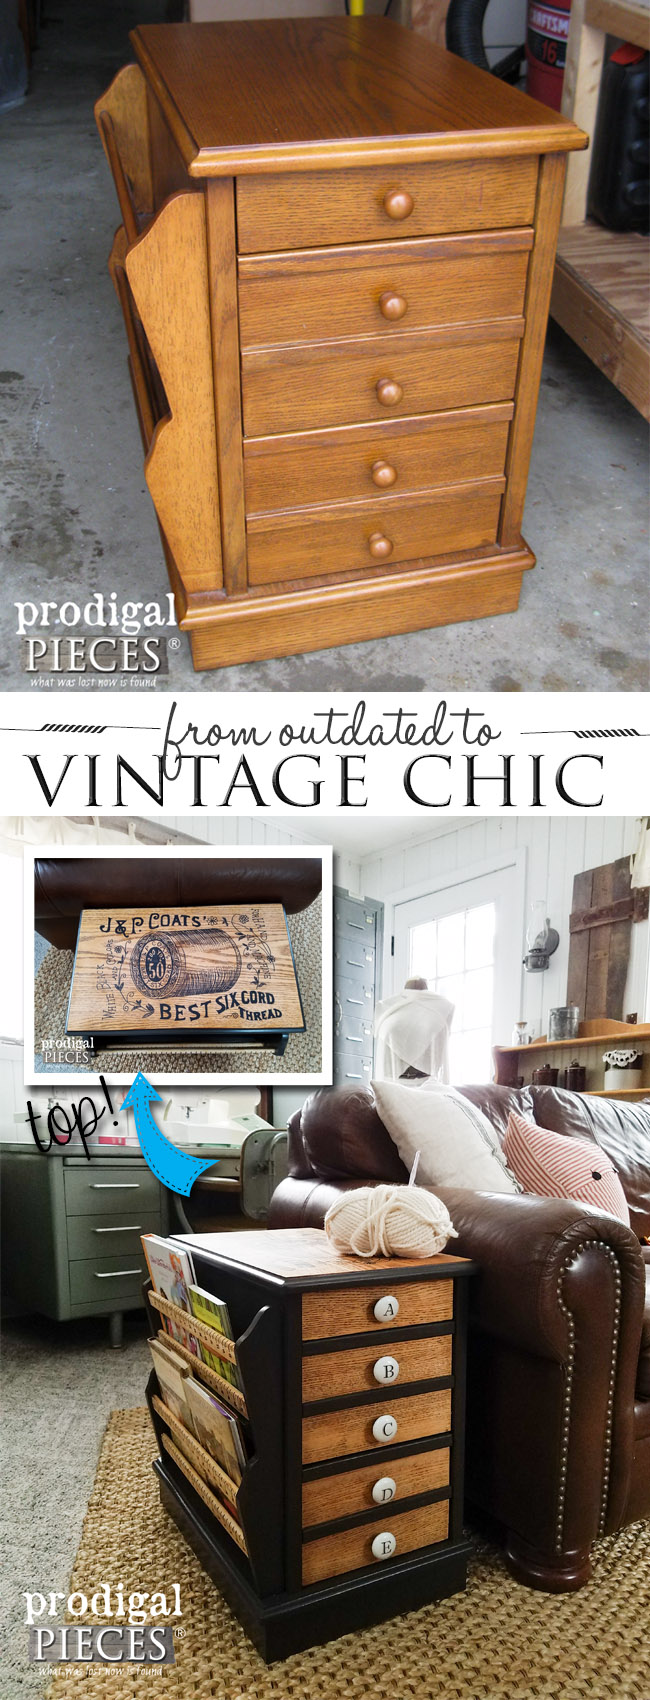 Outdated Side Table Gets a Vintage Chic Makeover Complete with Typography for Sewing Table Fun by Prodigal Pieces | prodigalpieces.com